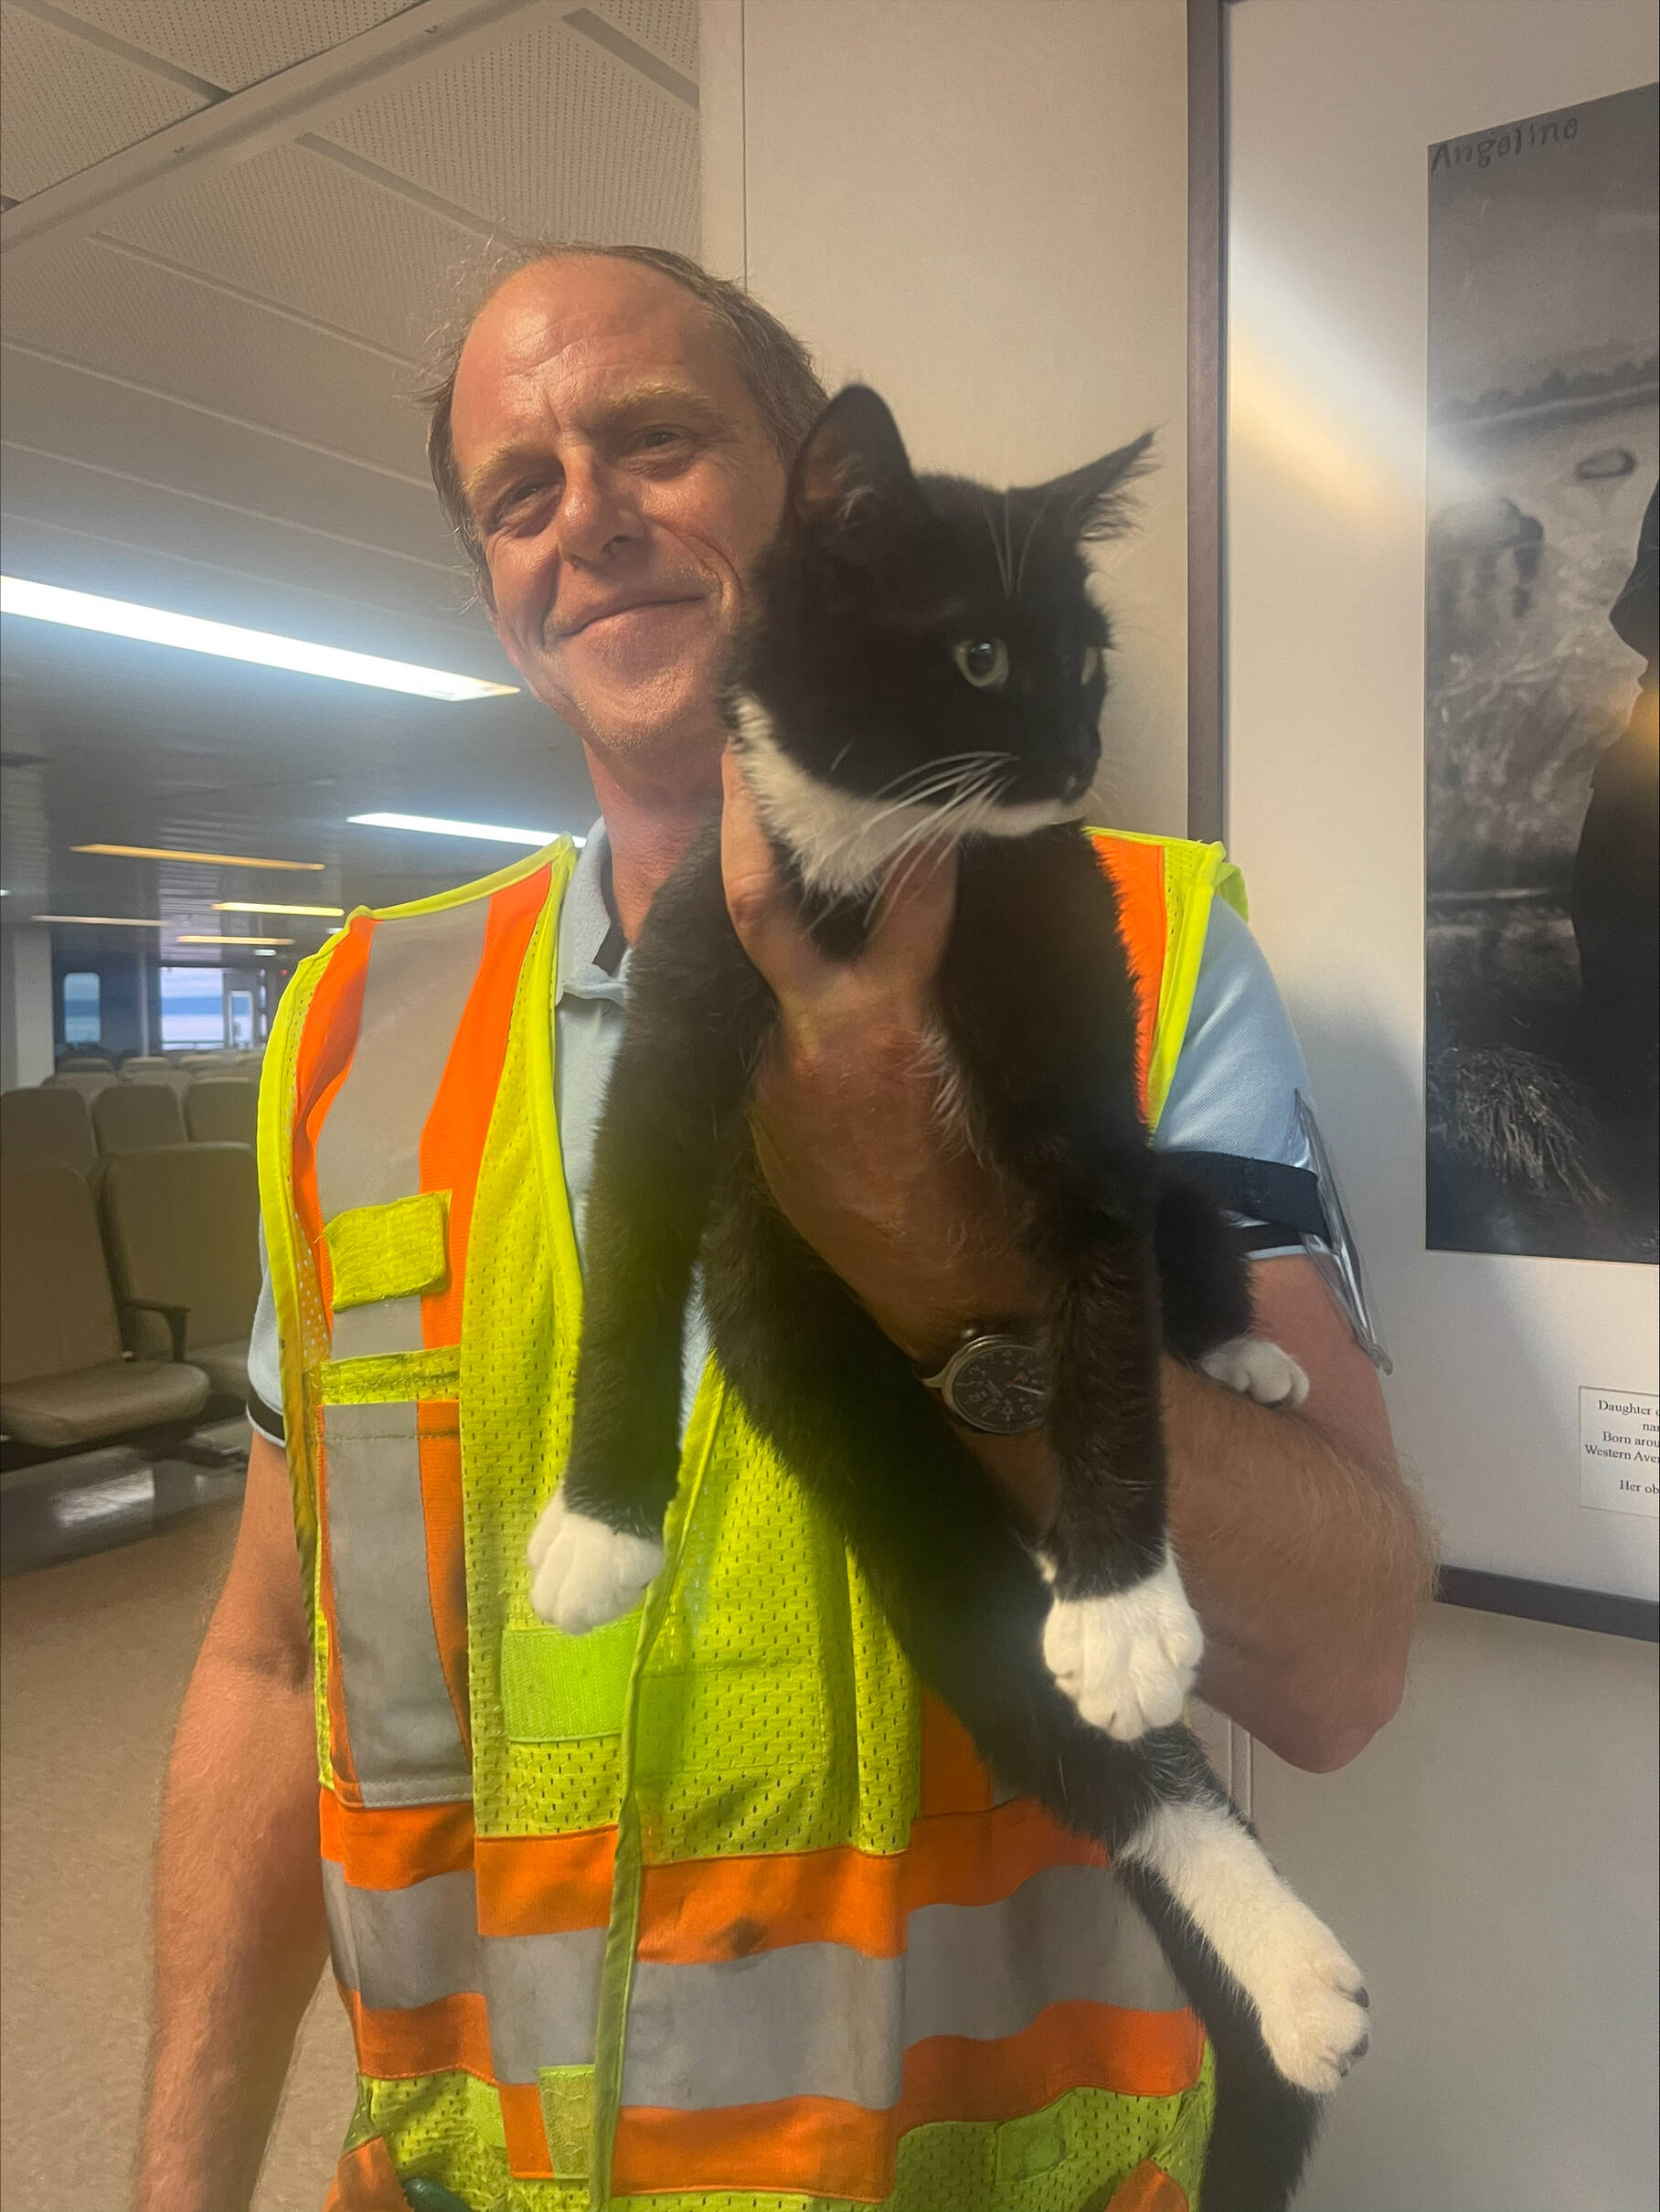 Photo provided
Washington State Ferries employee John Armstrong with Captain, the kitten he ended up adopting.